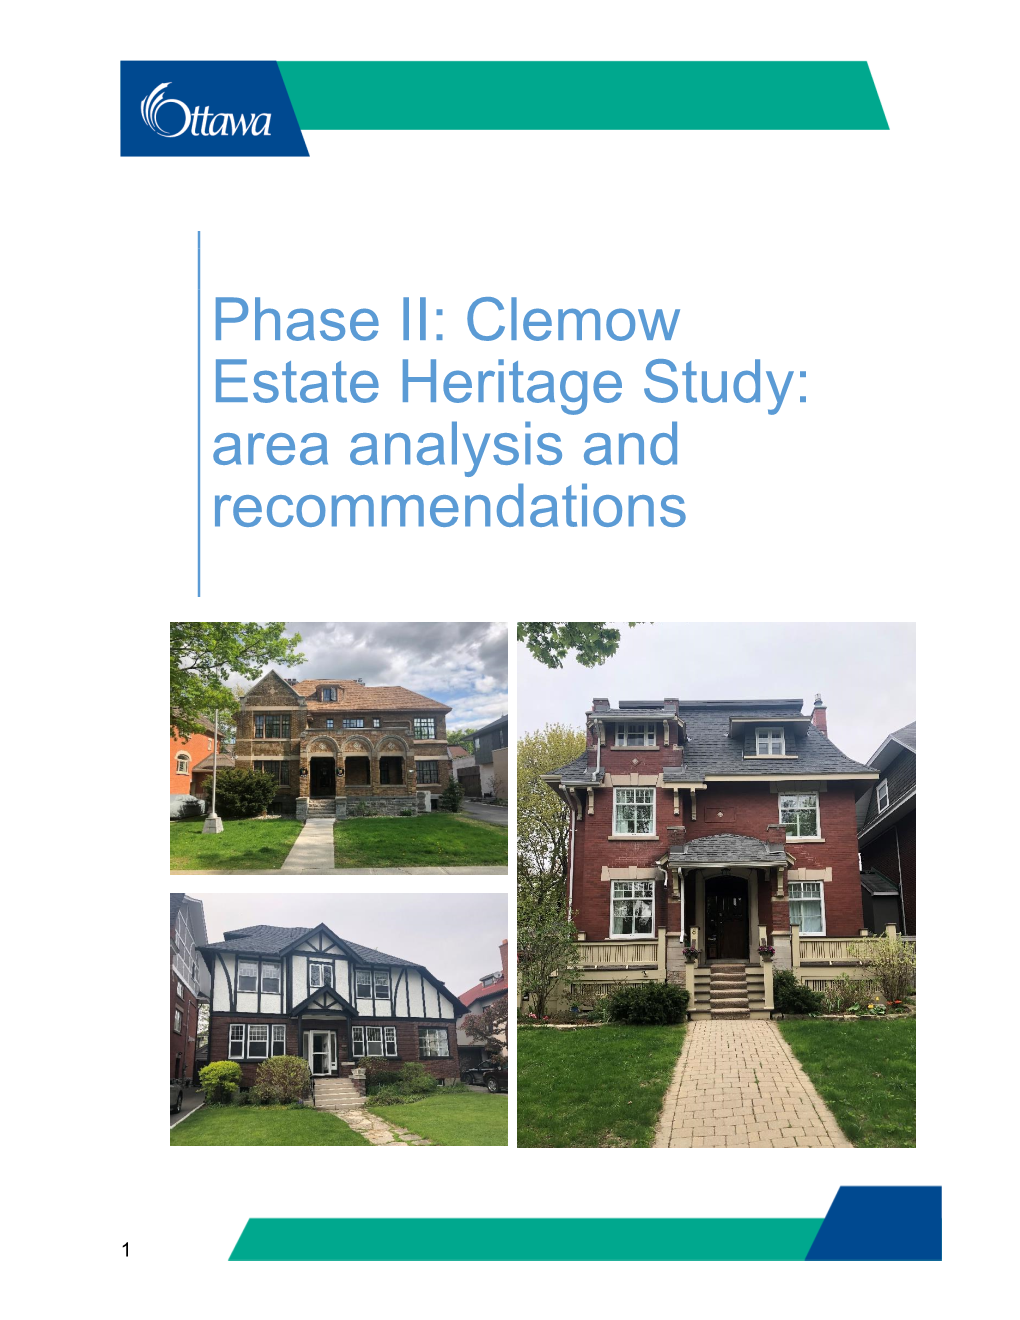 Phase II: Clemow Estate Heritage Study: Area Analysis and Recommendations